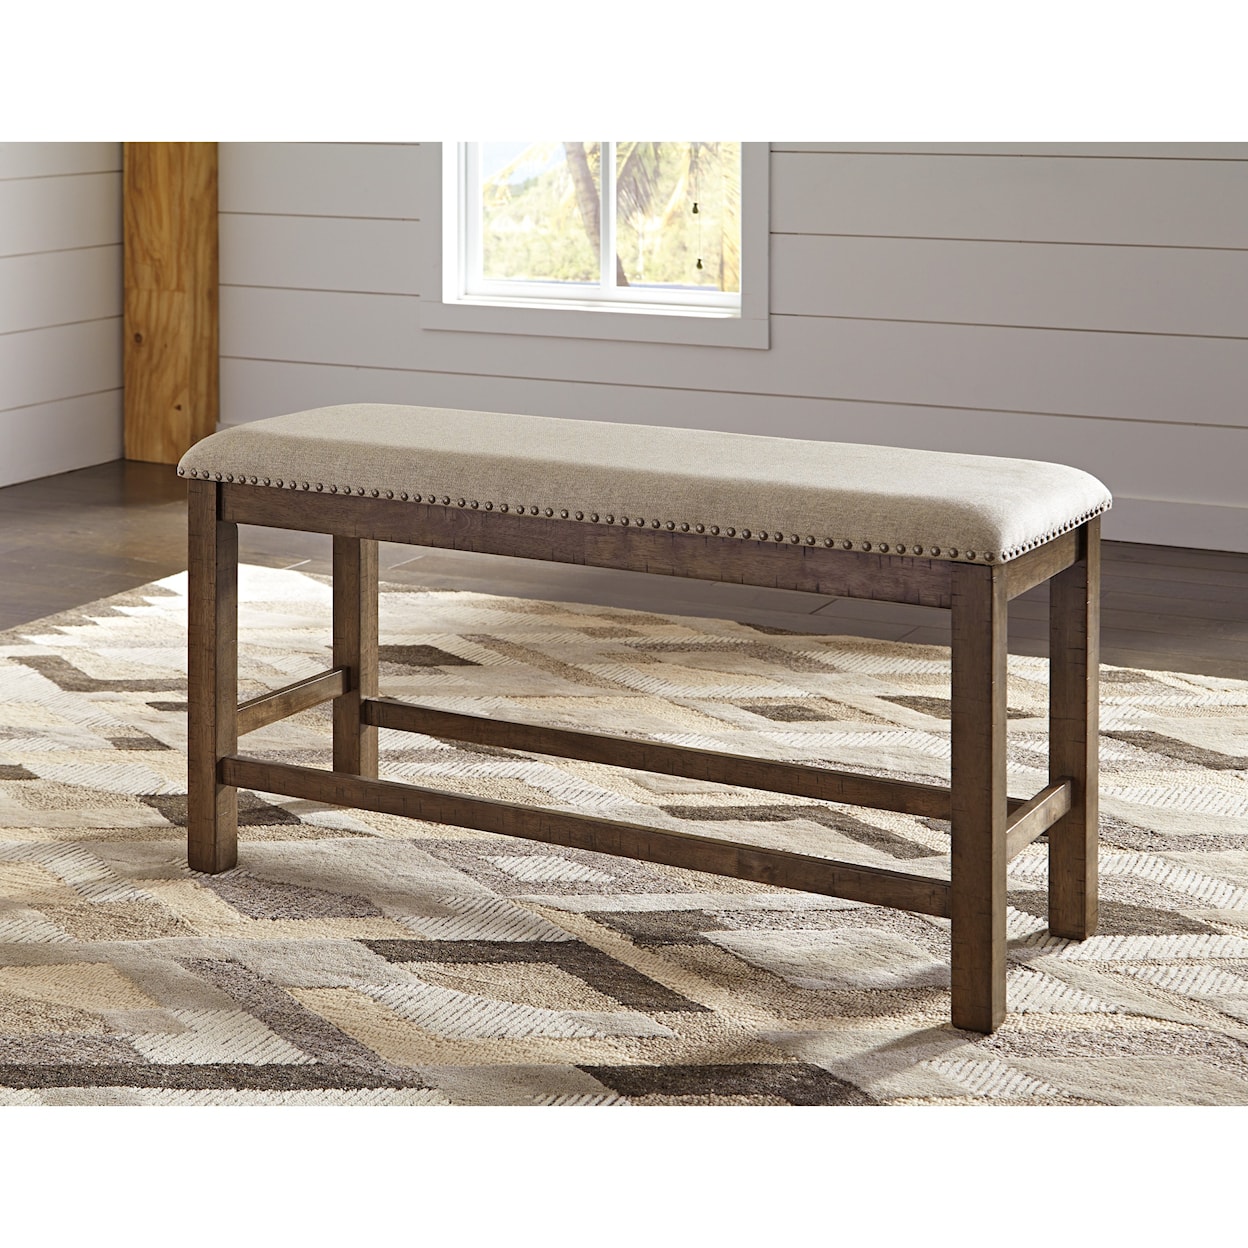 Signature Design by Ashley Furniture Moriville Double Upholstered Bench